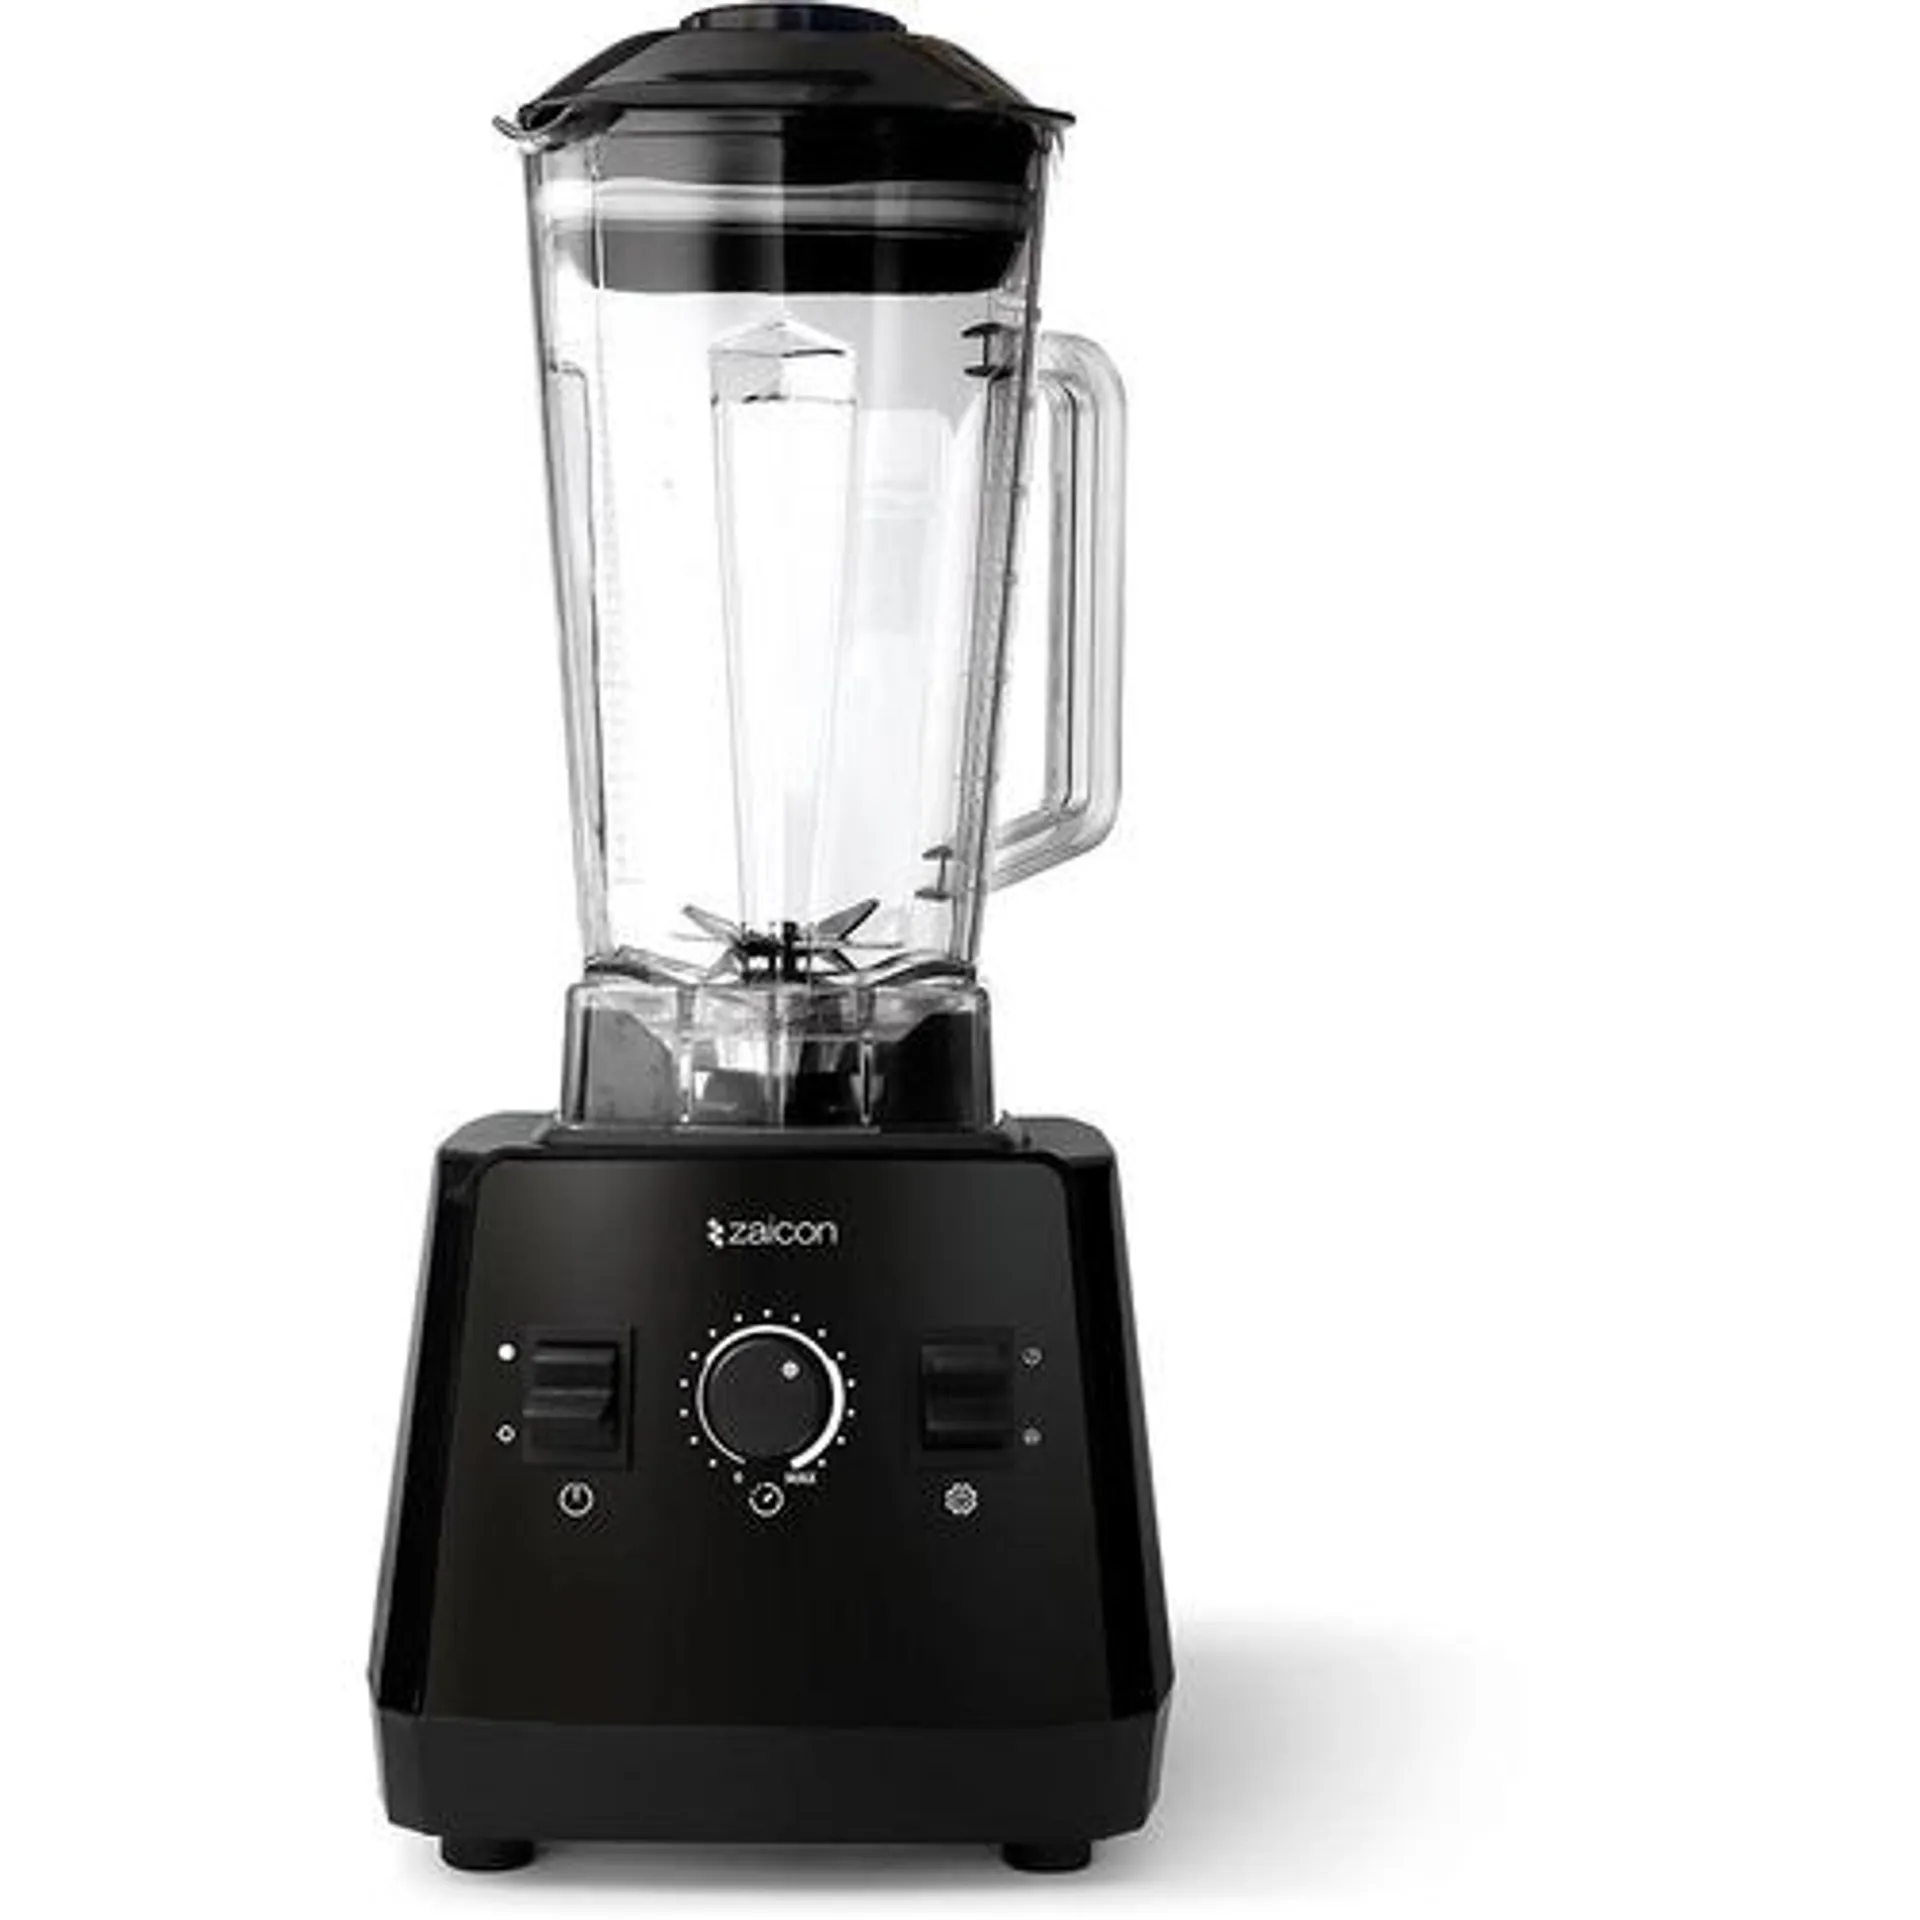 6-Speed Heavy Duty 60oz Blender in Black with Pulse Setting